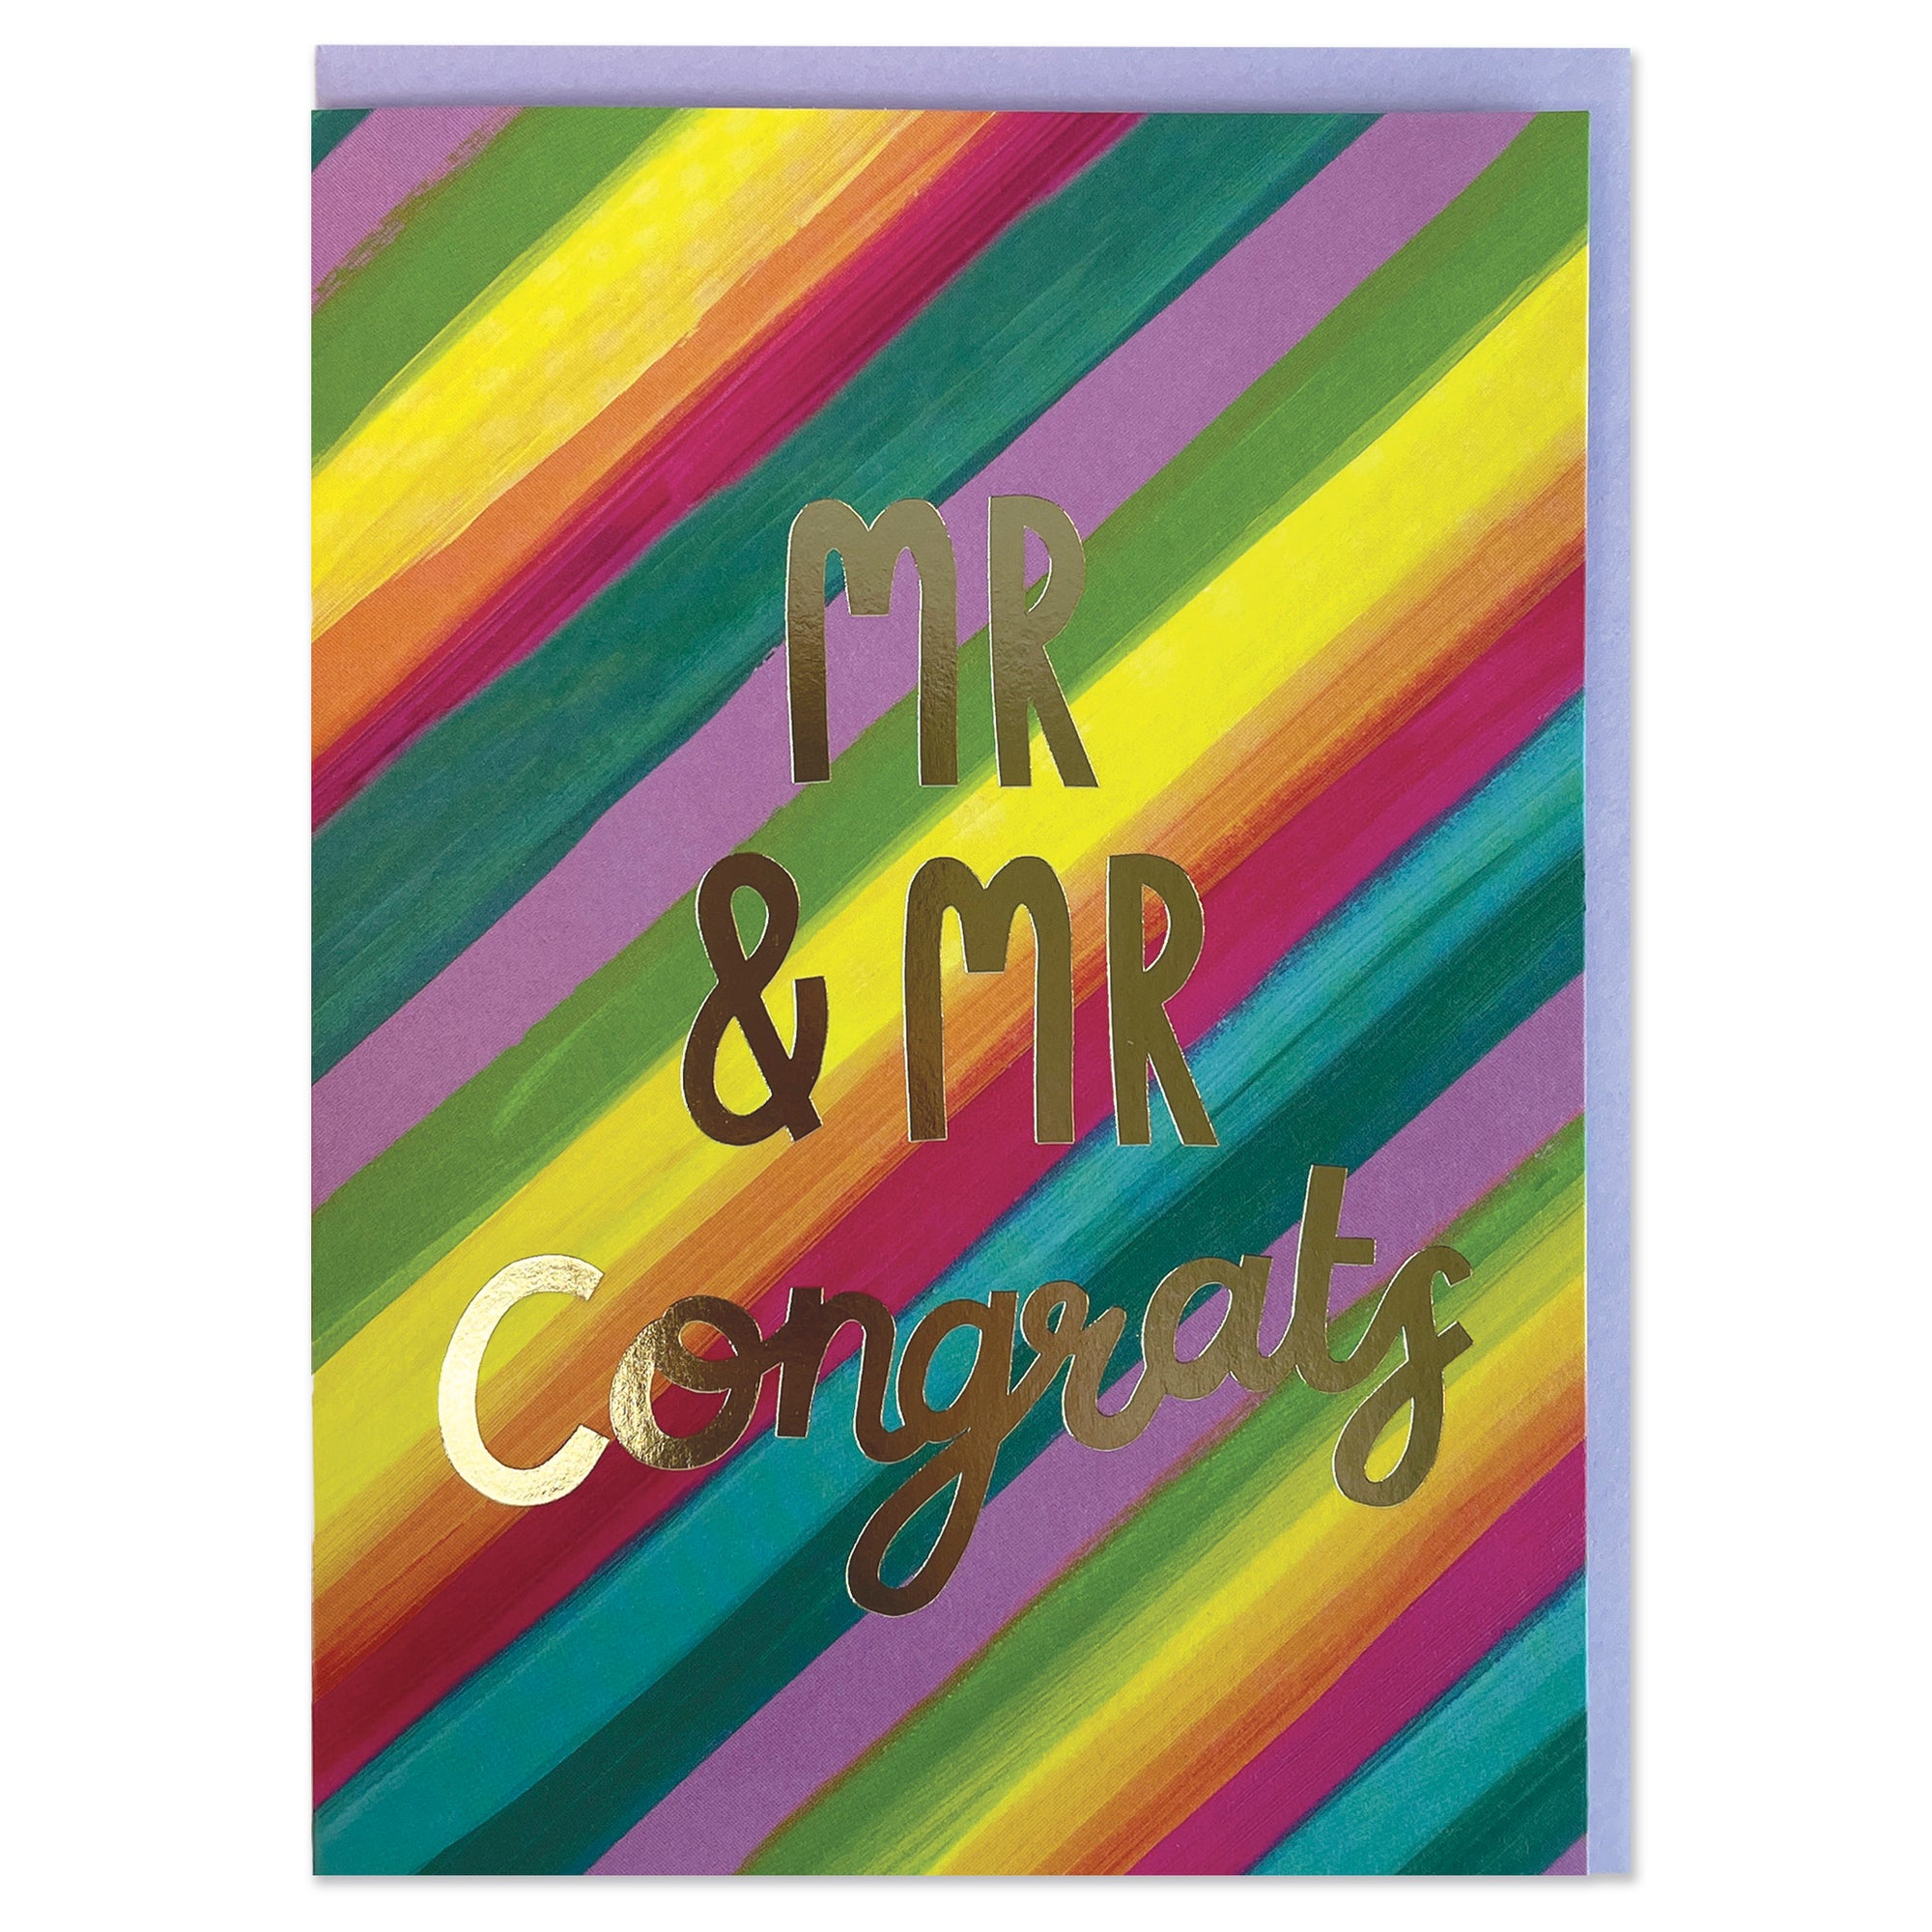 A colourful rainbow stripe greetings card to celebrate a wedding. The rainbow stripes are diagonal across the card and the writing in the centre of the card is big gold foil stating 'Mr & Mr Congrats'.